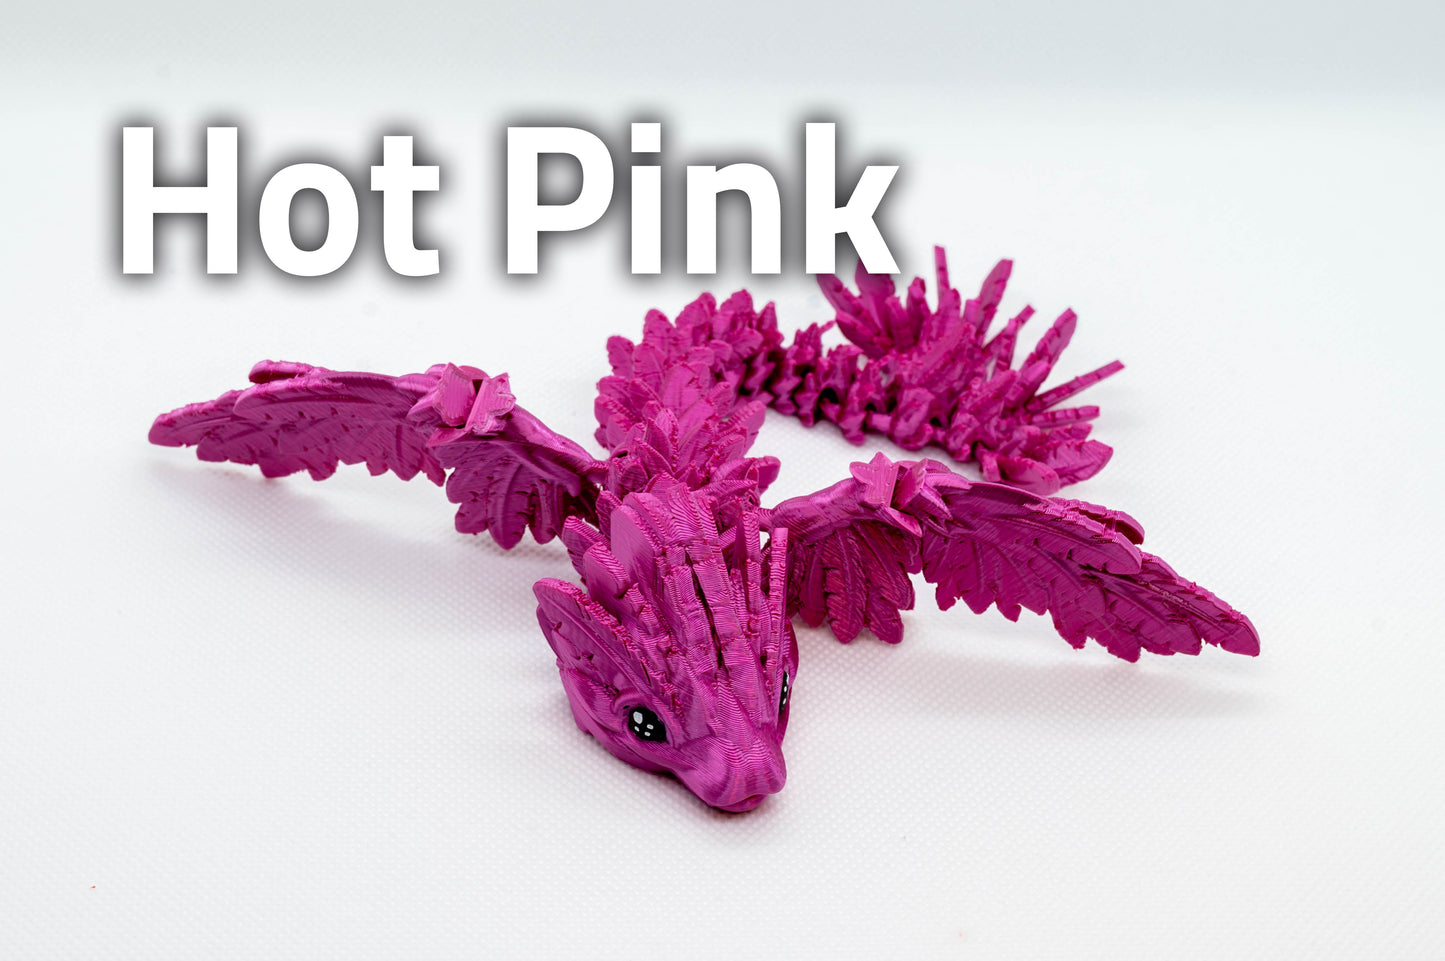 3d printed dragon, 3d printed flying serpent, baby flying serpent - Best Books